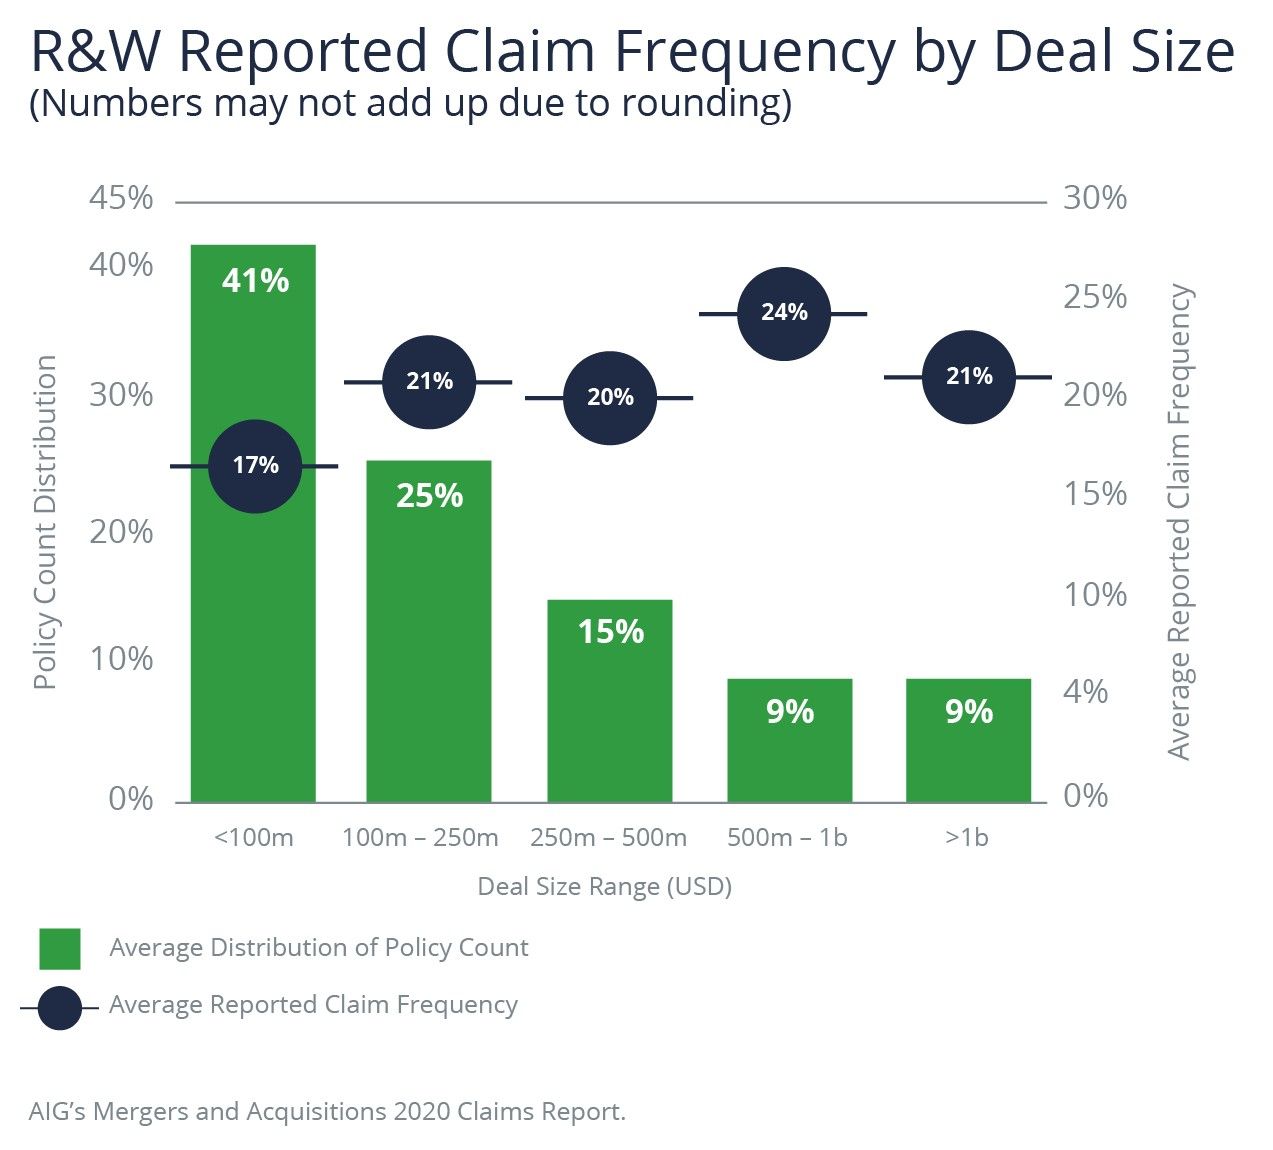 R&W Reported Claim Frequency by Deal Size